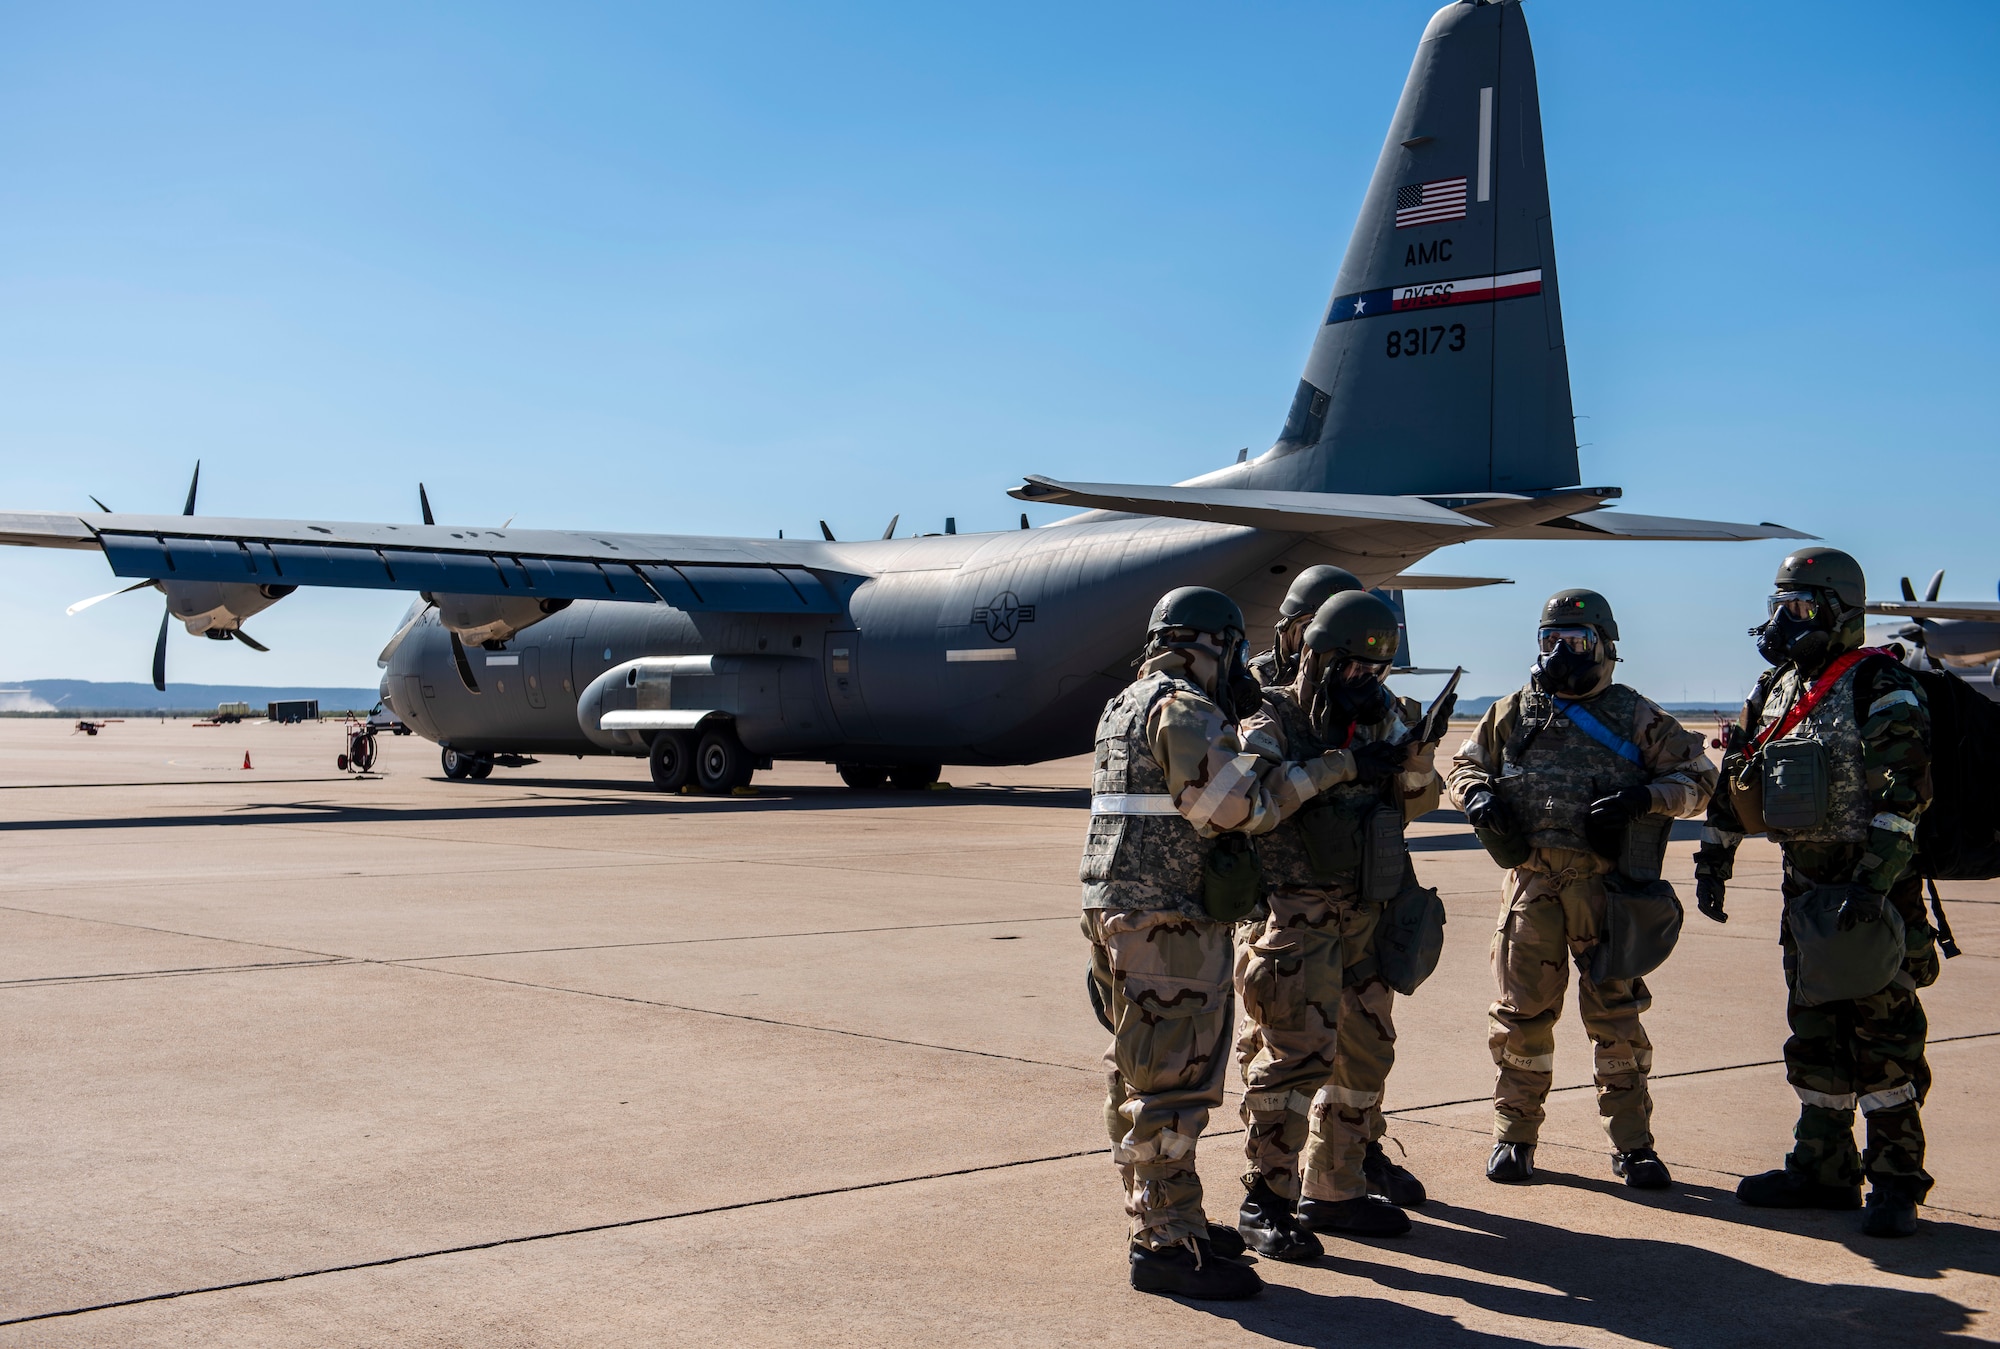 Airmen assigned to the 317th Maintenance Group and 317th Aircraft Maintenance Squadron prepare to conduct a perimeter sweep during an exercise at Dyess Air Force Base, Texas, Nov. 18, 2020.